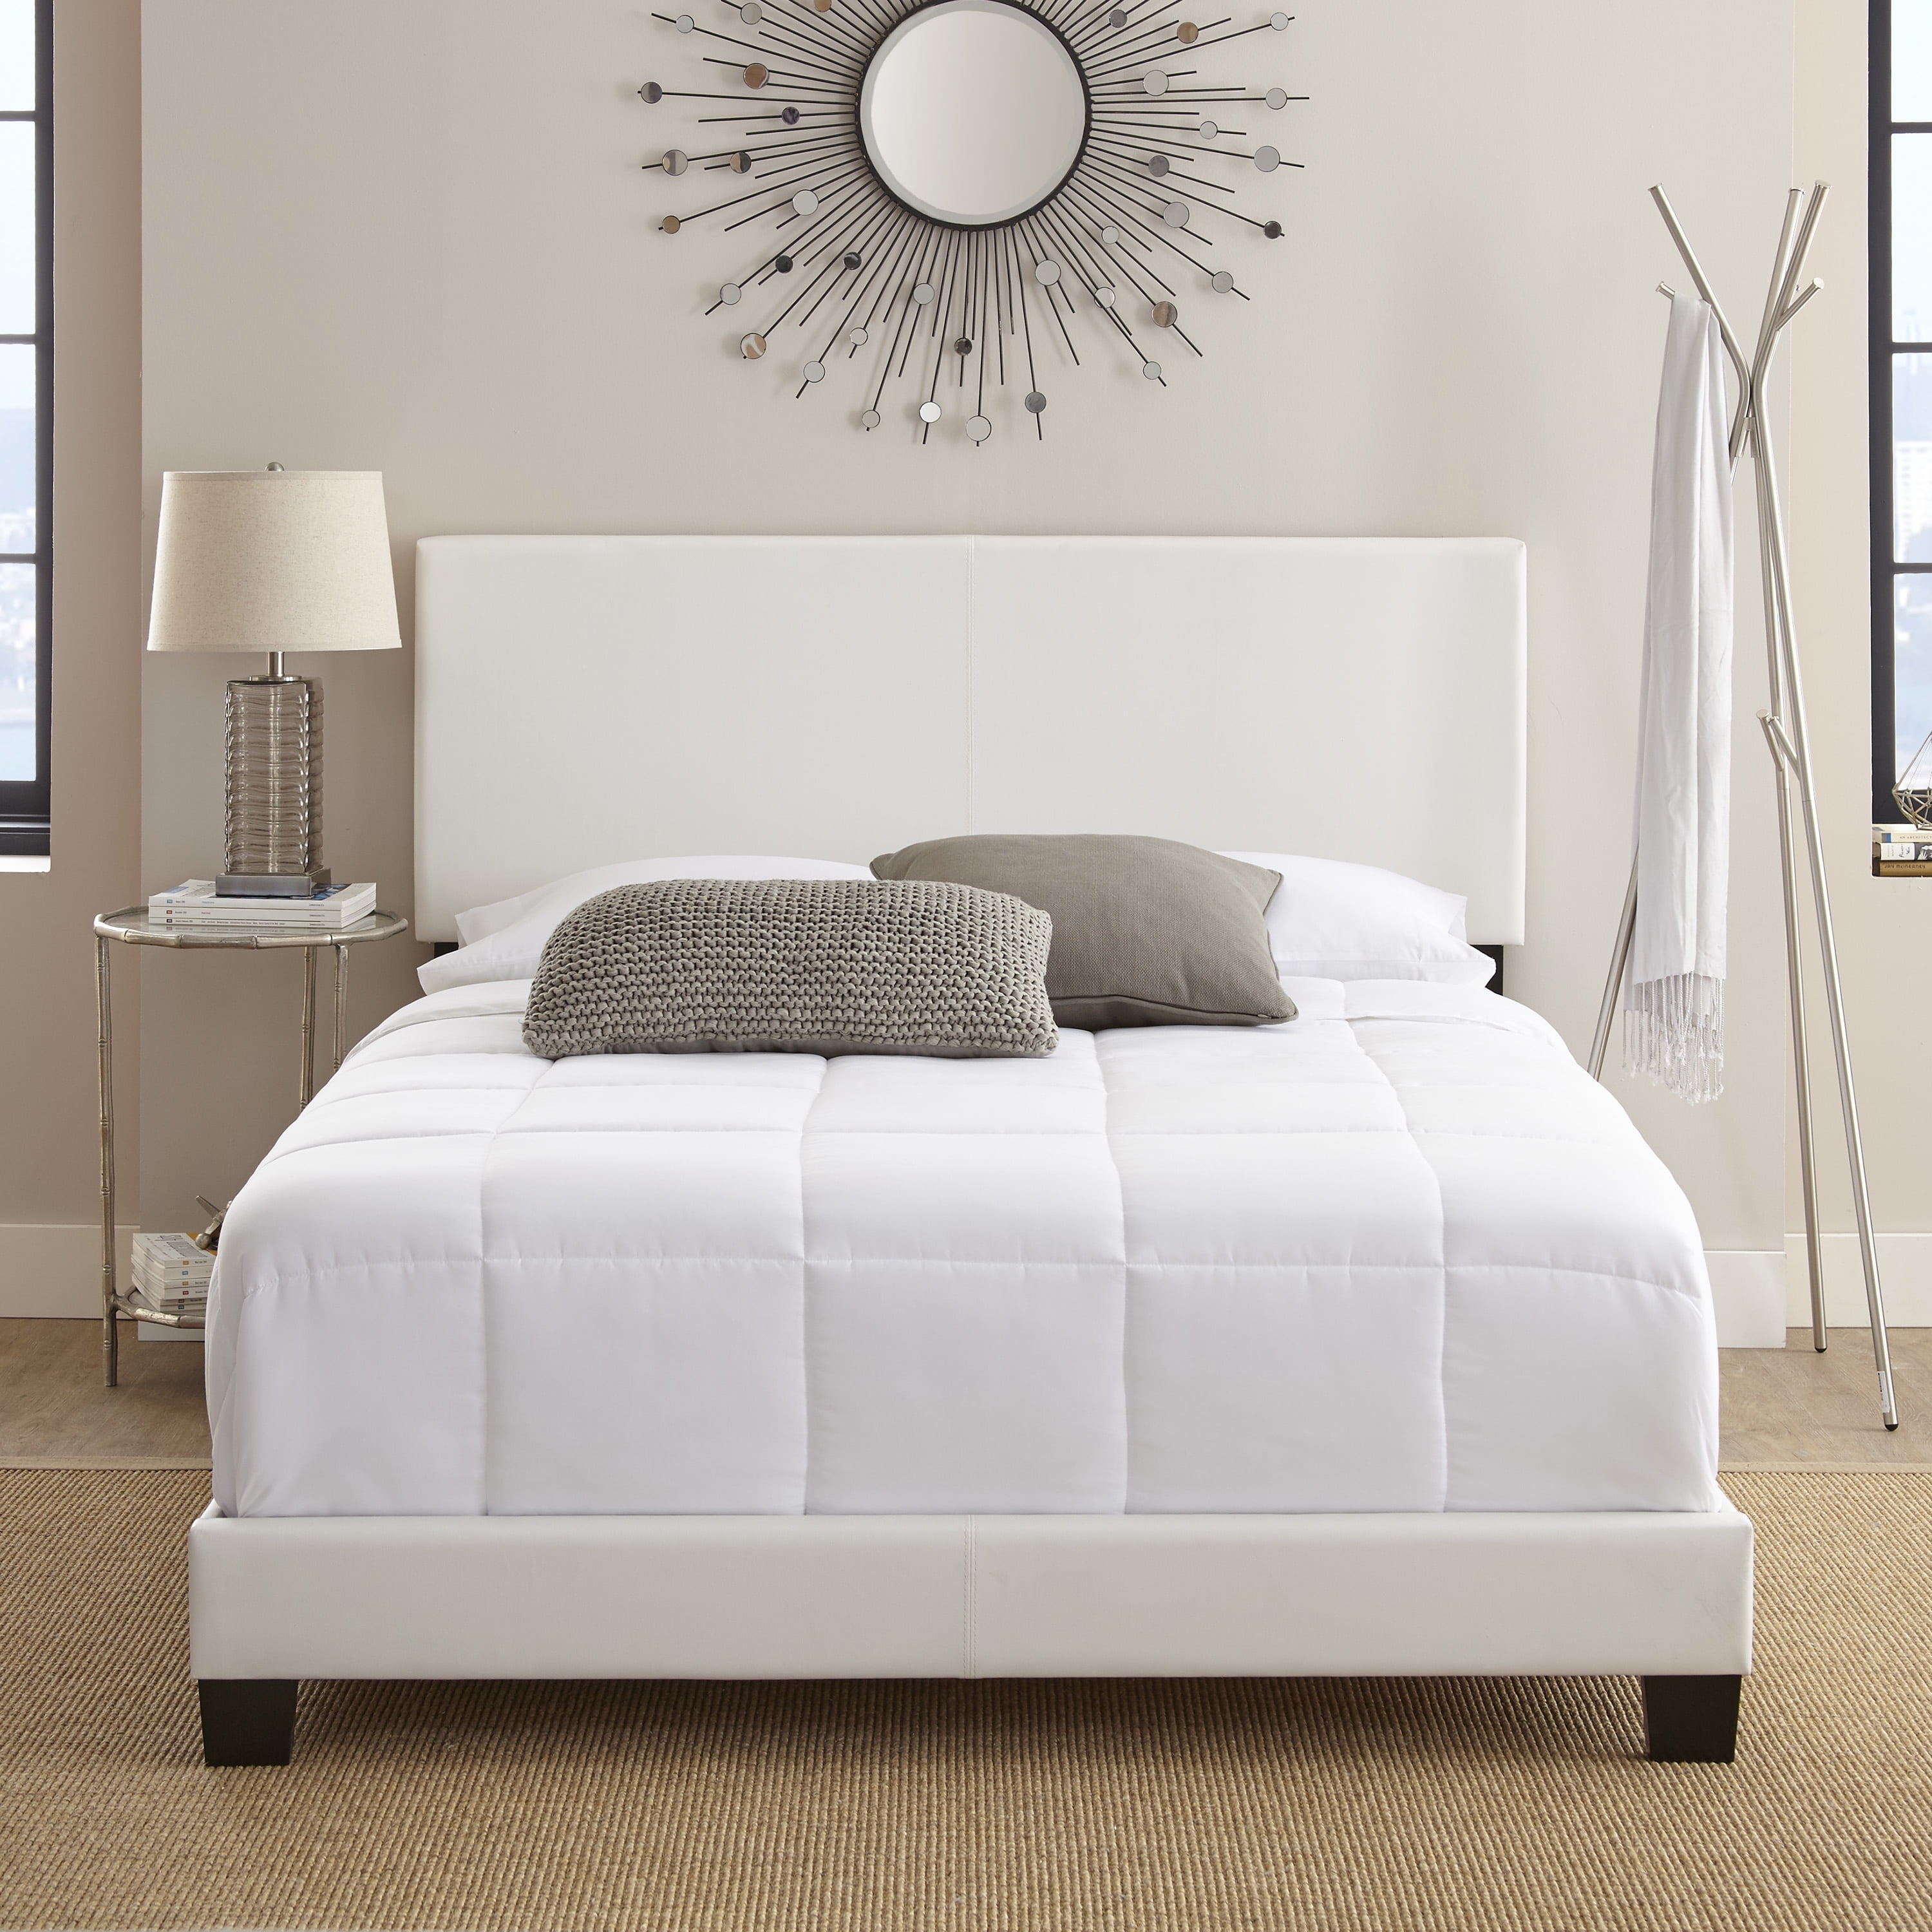 Premier Sutton Upholstered Faux Leather, Modern White Bed Frame